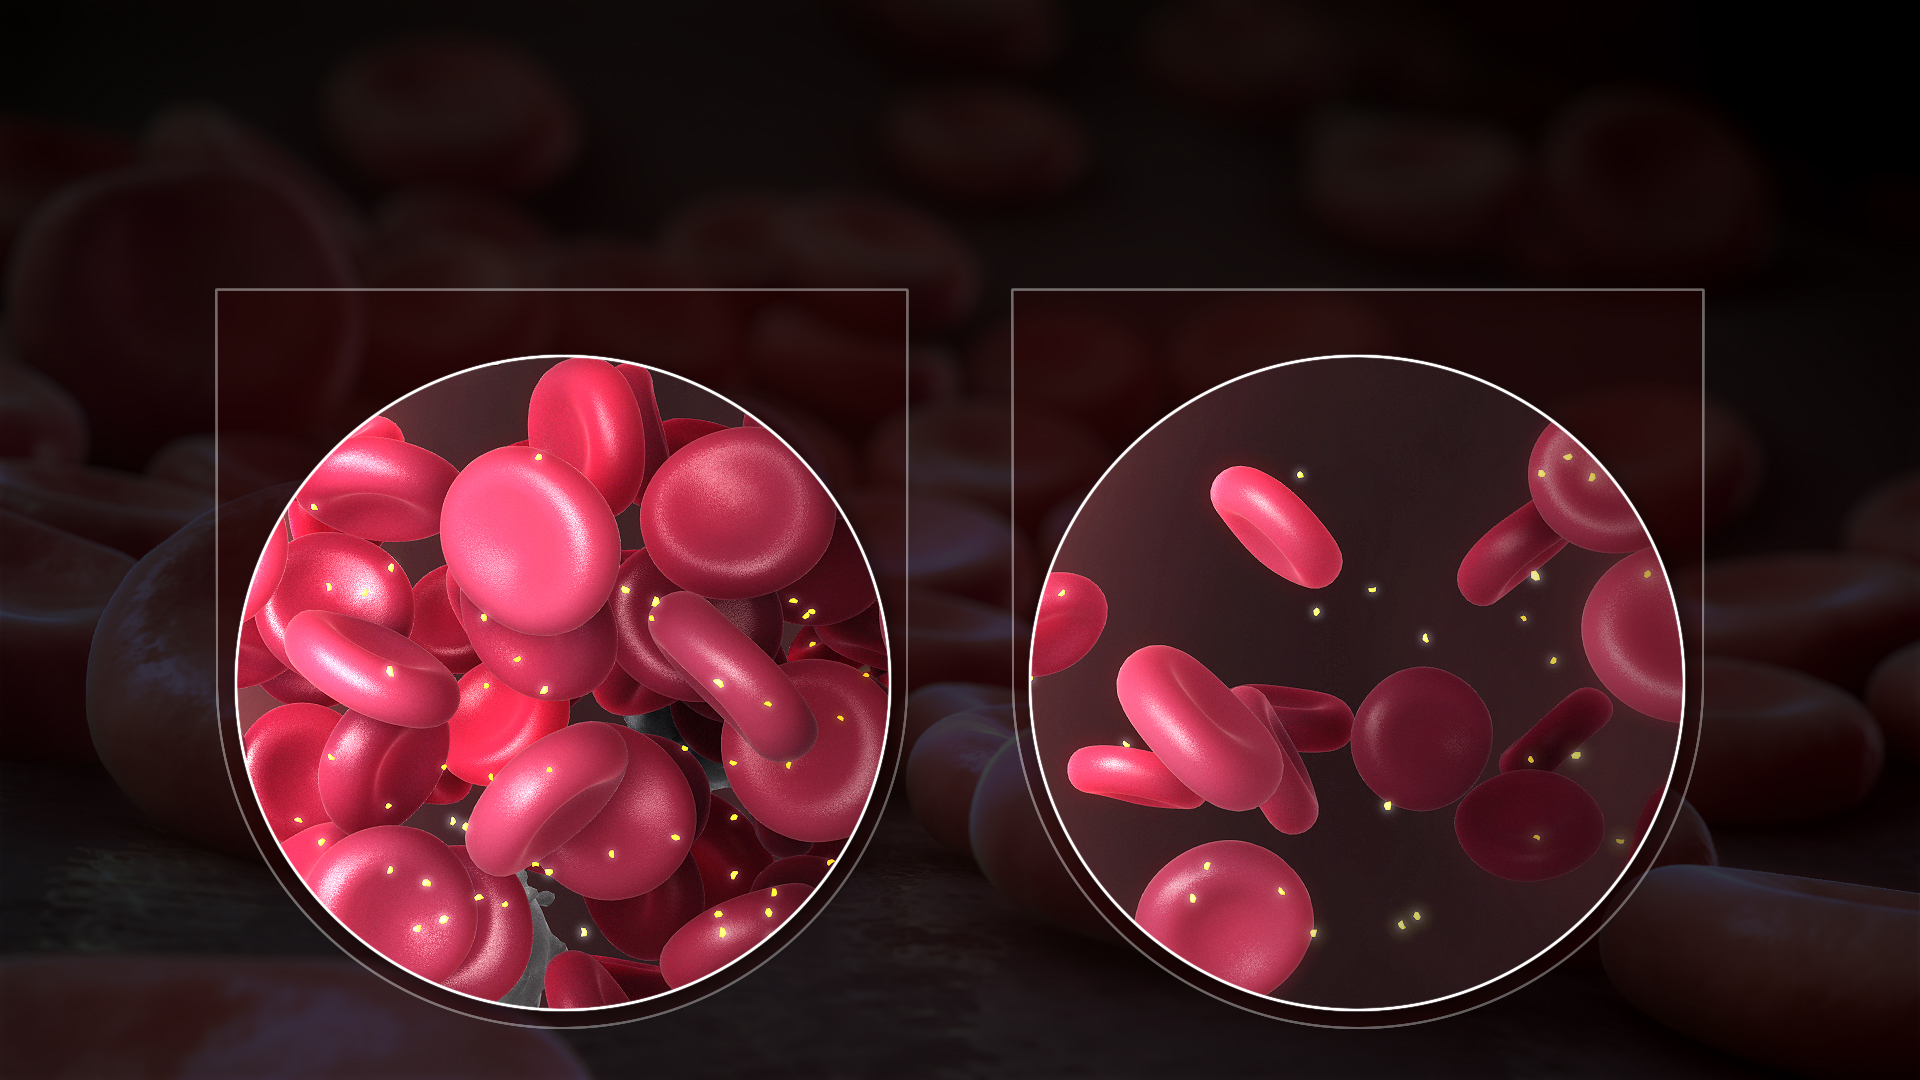 Different Types Of Anemia And What Causes Them